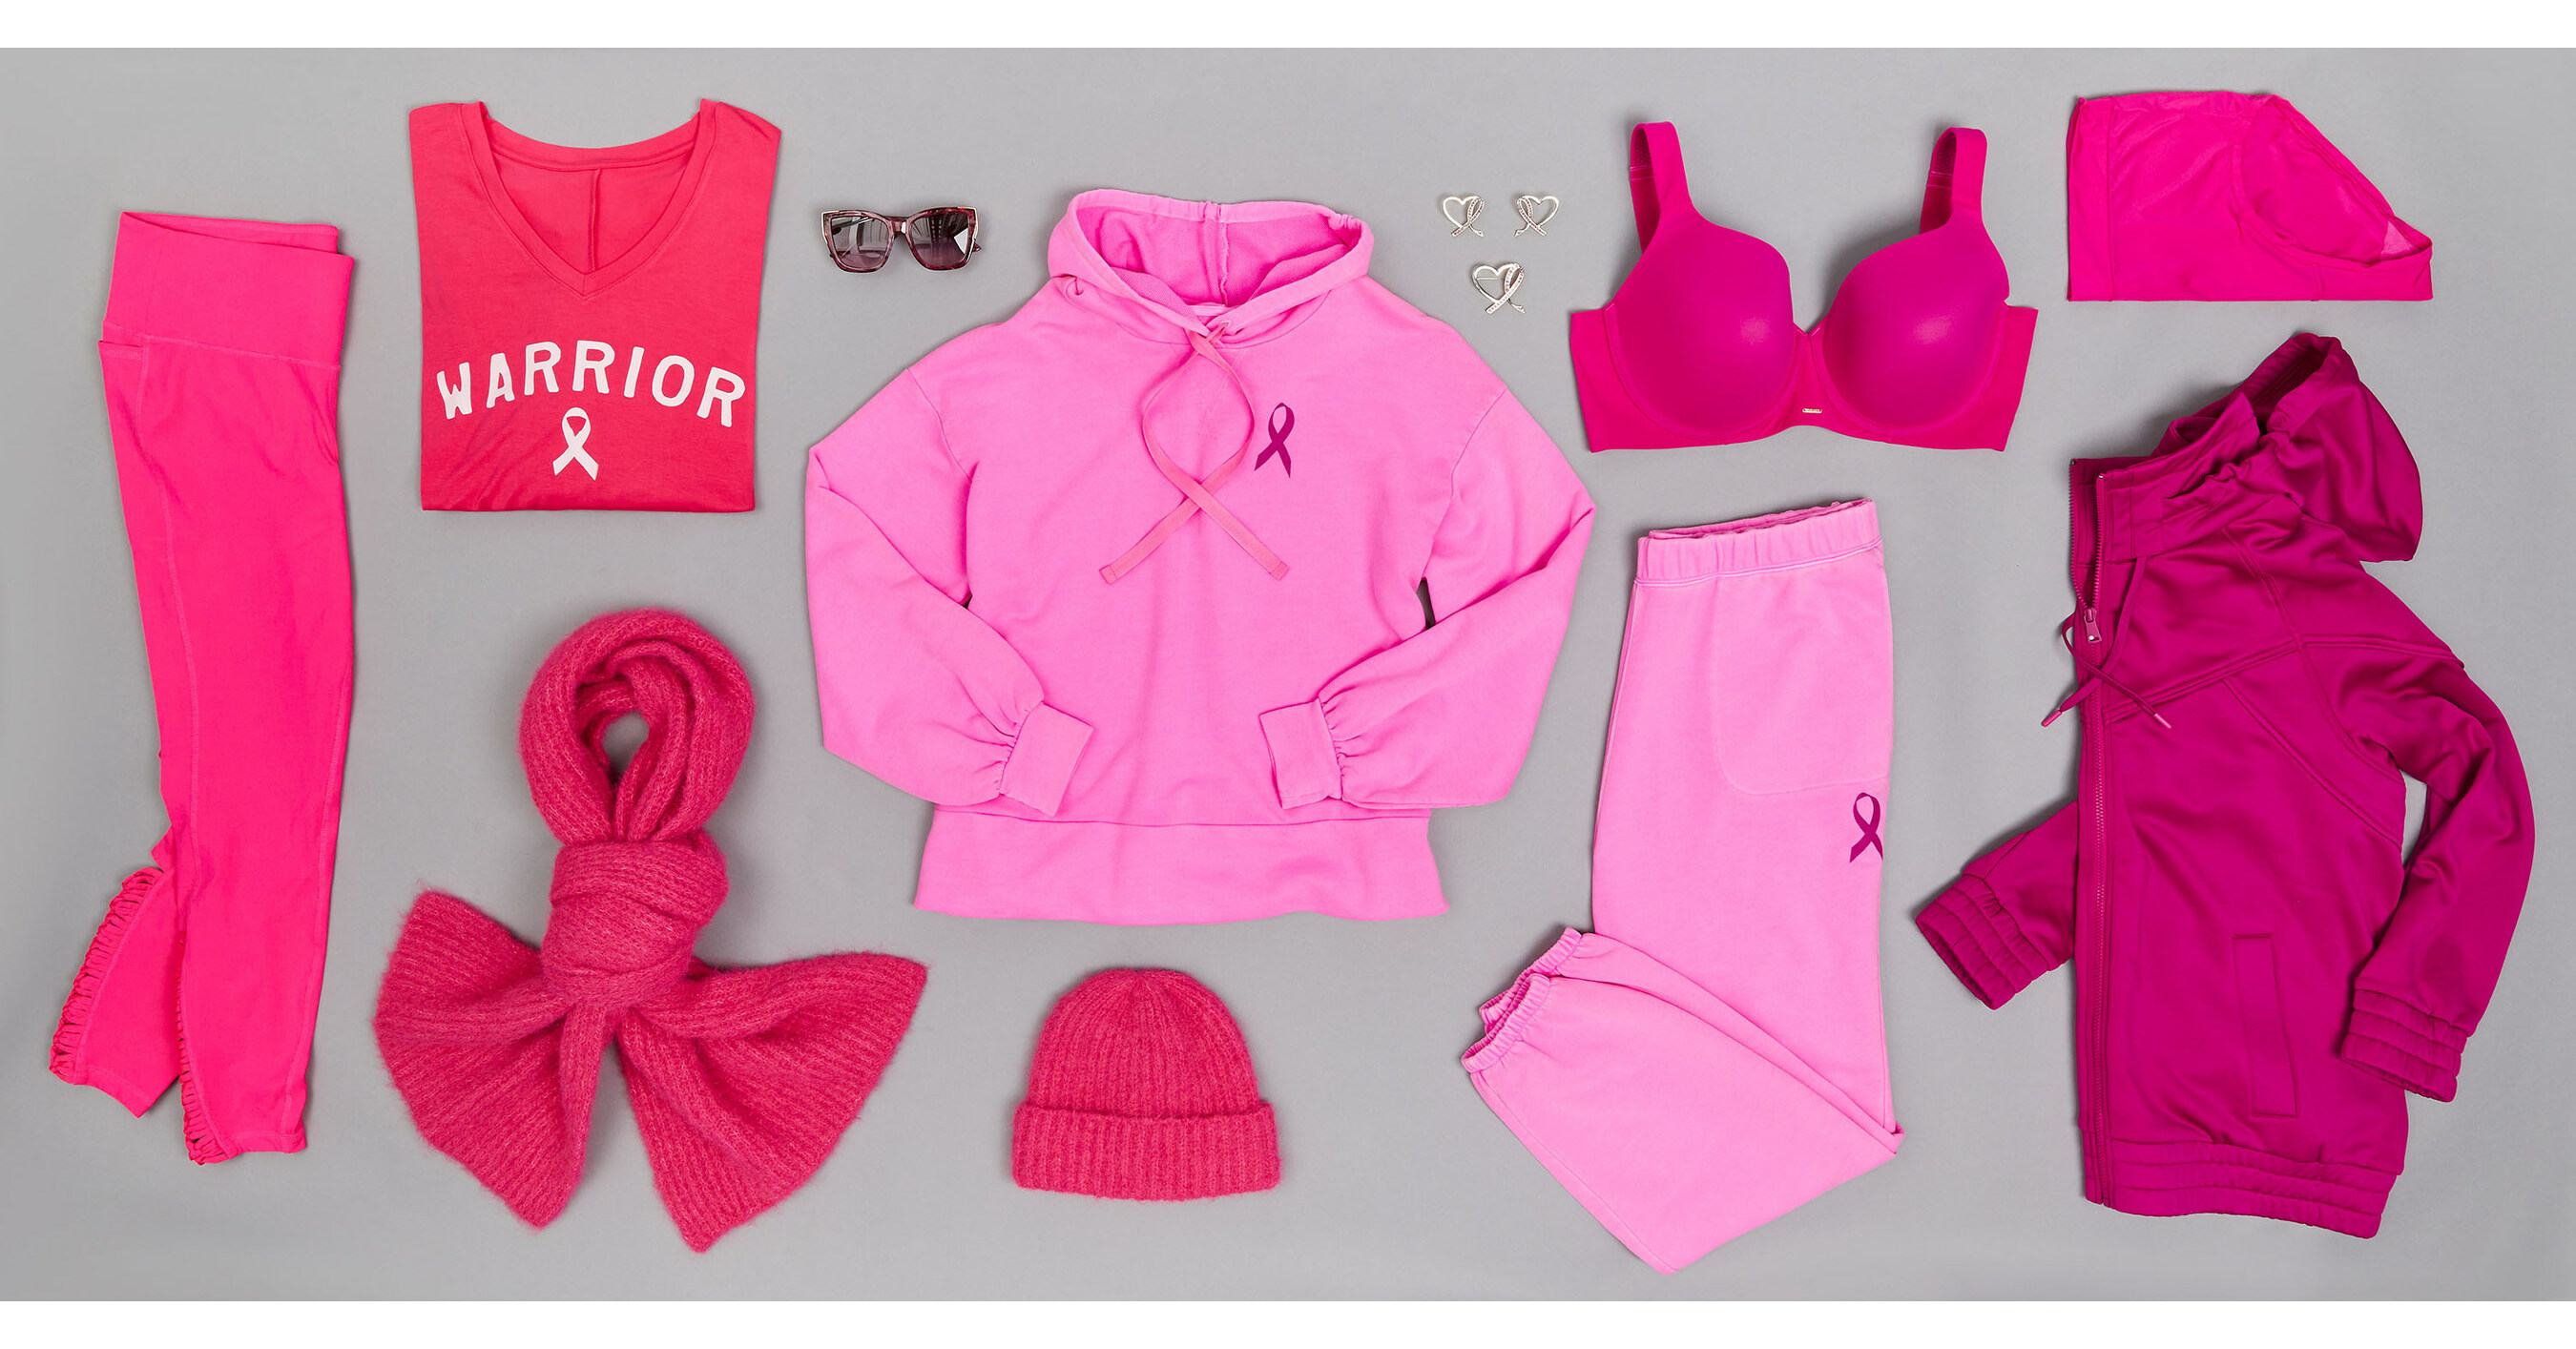 LANE BRYANT TO PARTNER WITH THE BREAST CANCER RESEARCH FOUNDATION (BCRF)